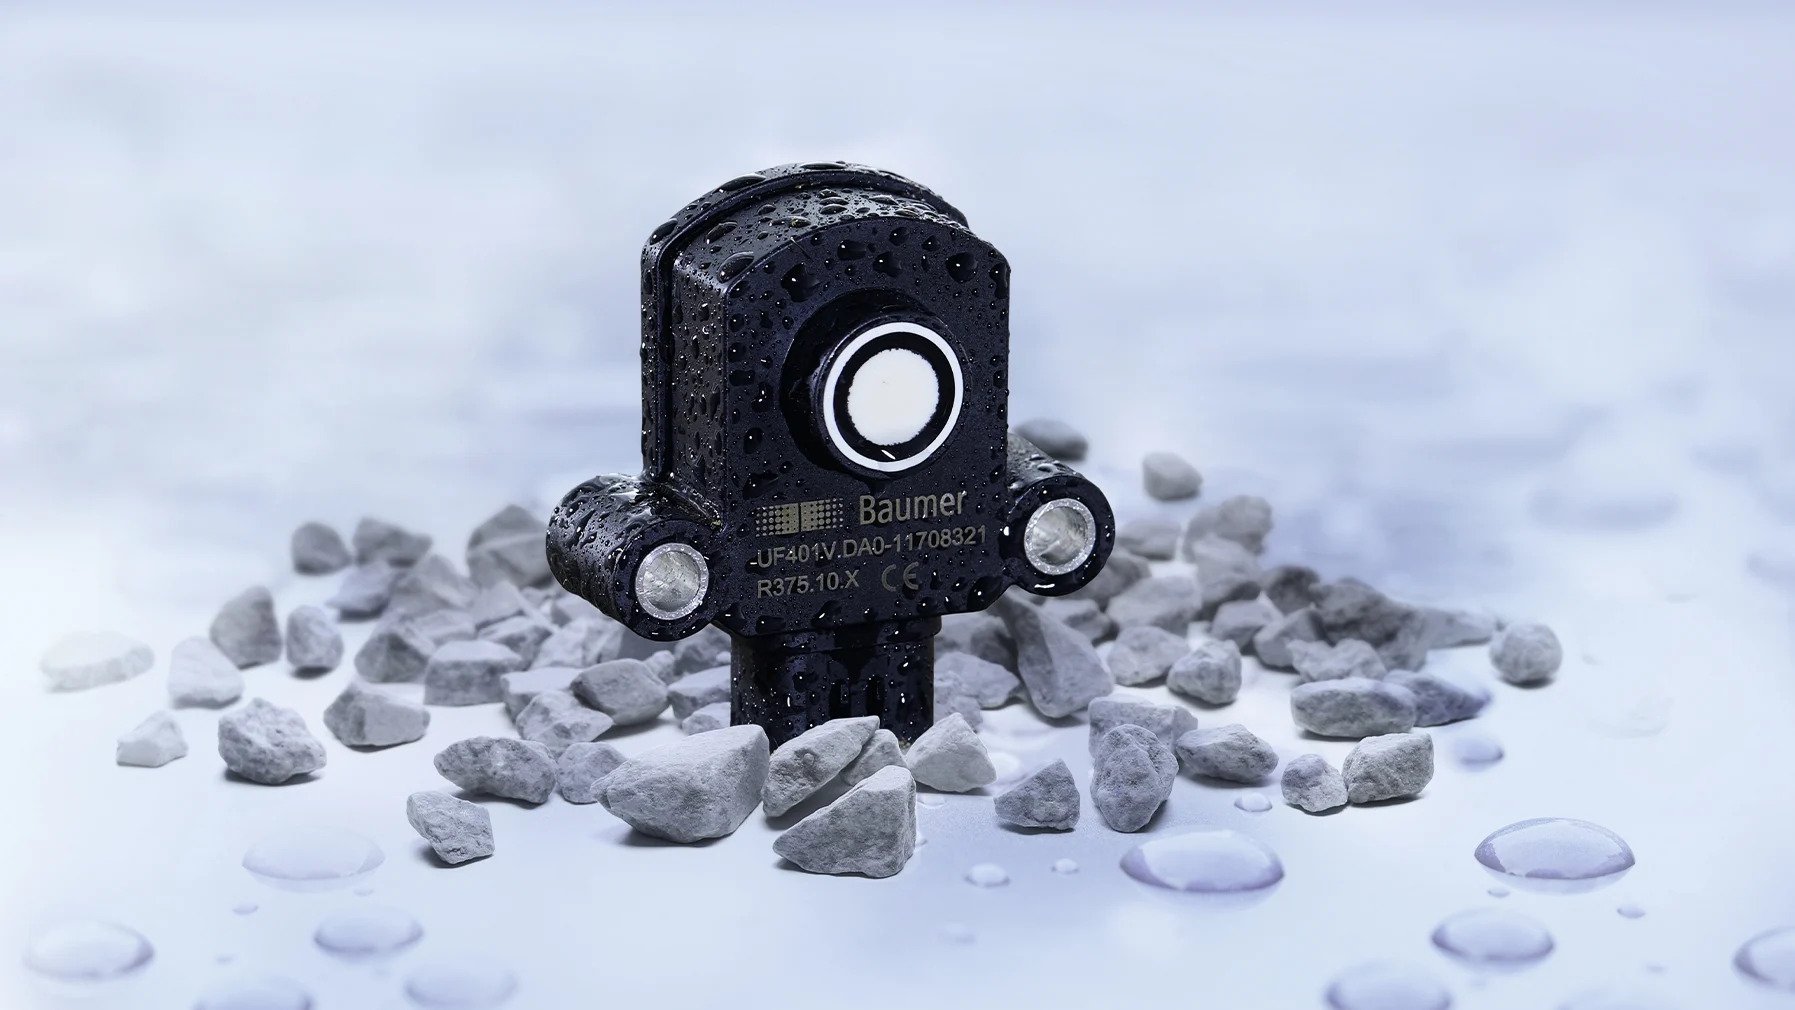 Baumer’s latest ultrasonic sensor is designed to operate on mobile machines in harsh environments